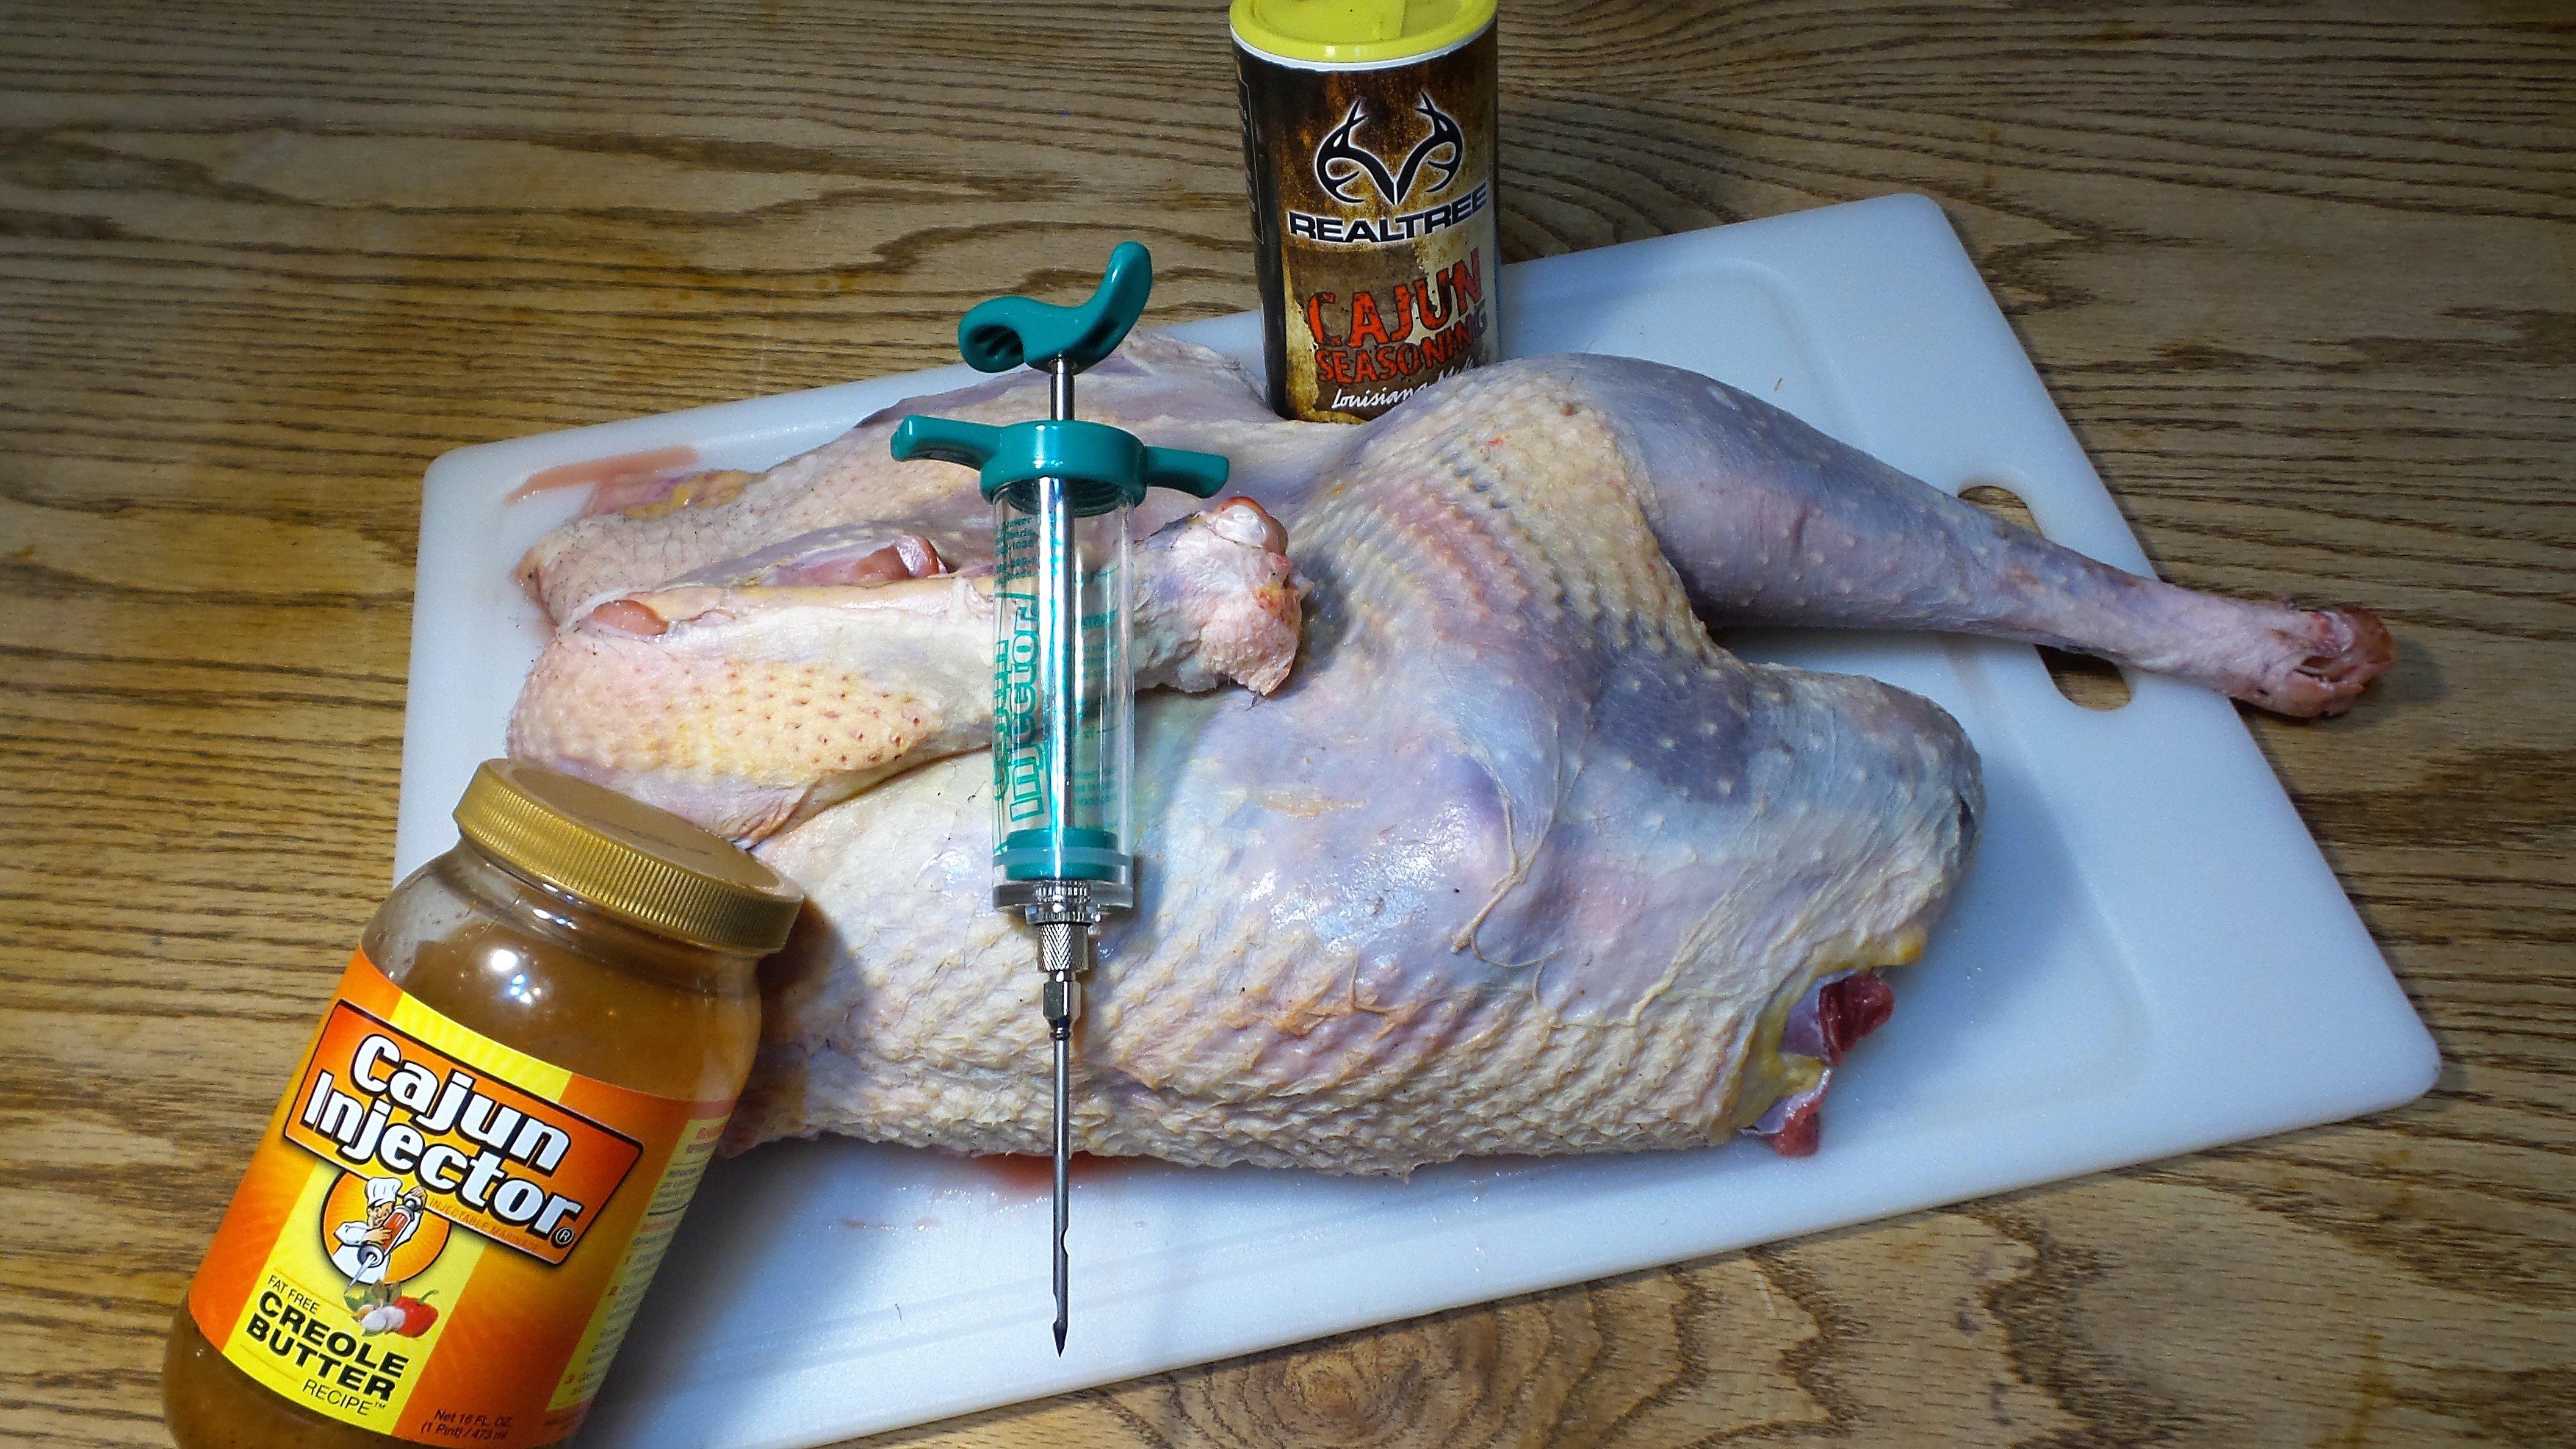 Injectable marinades work well for adding moisture and flavor to deep fried turkeys.